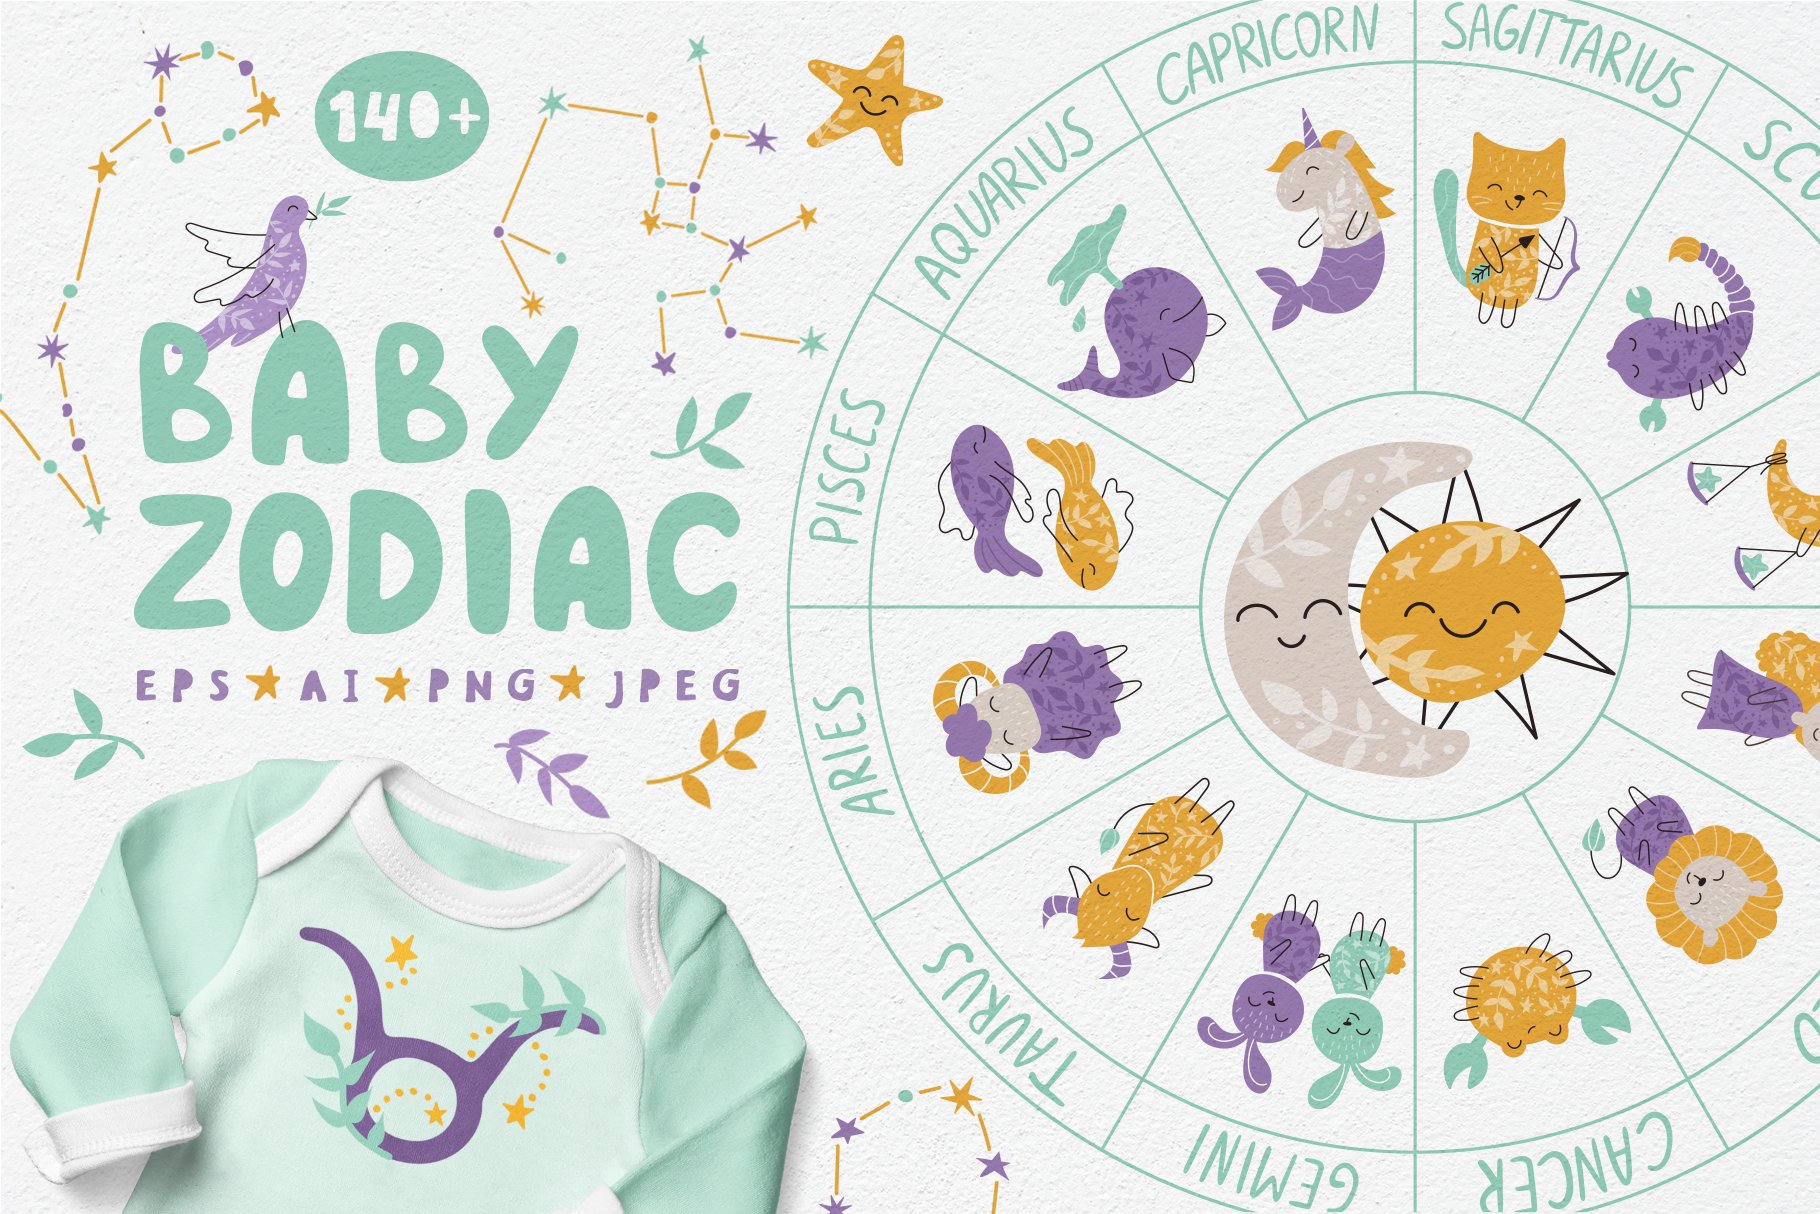 Colorful baby zodiac elements.